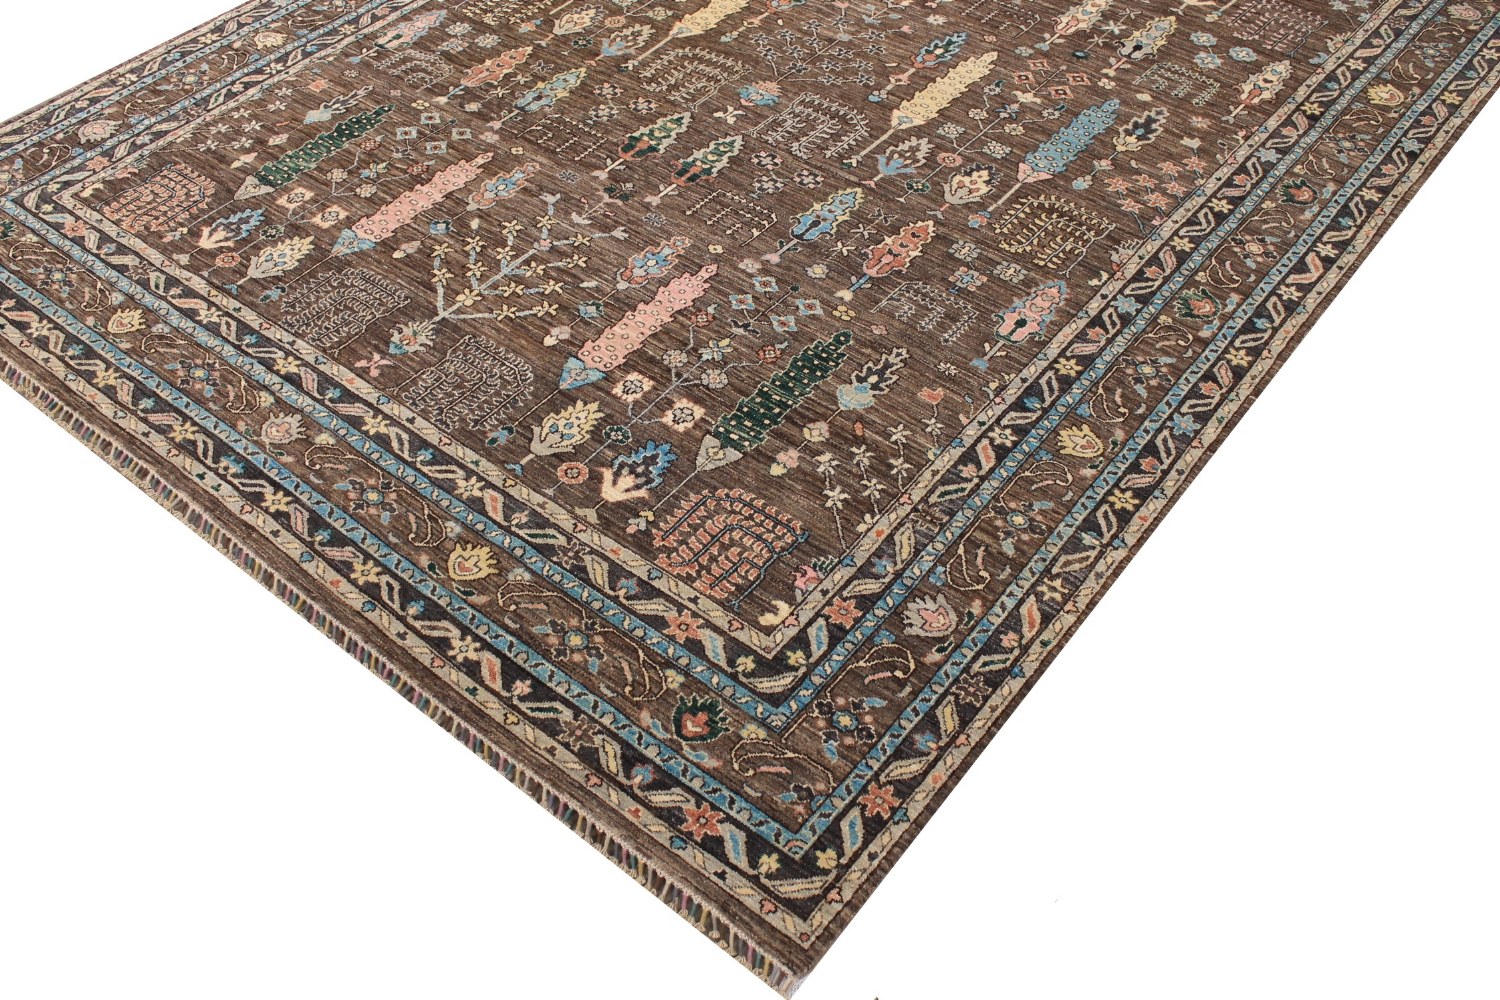 9x12 Aryana & Antique Revivals Hand Knotted Wool Area Rug - MR026142